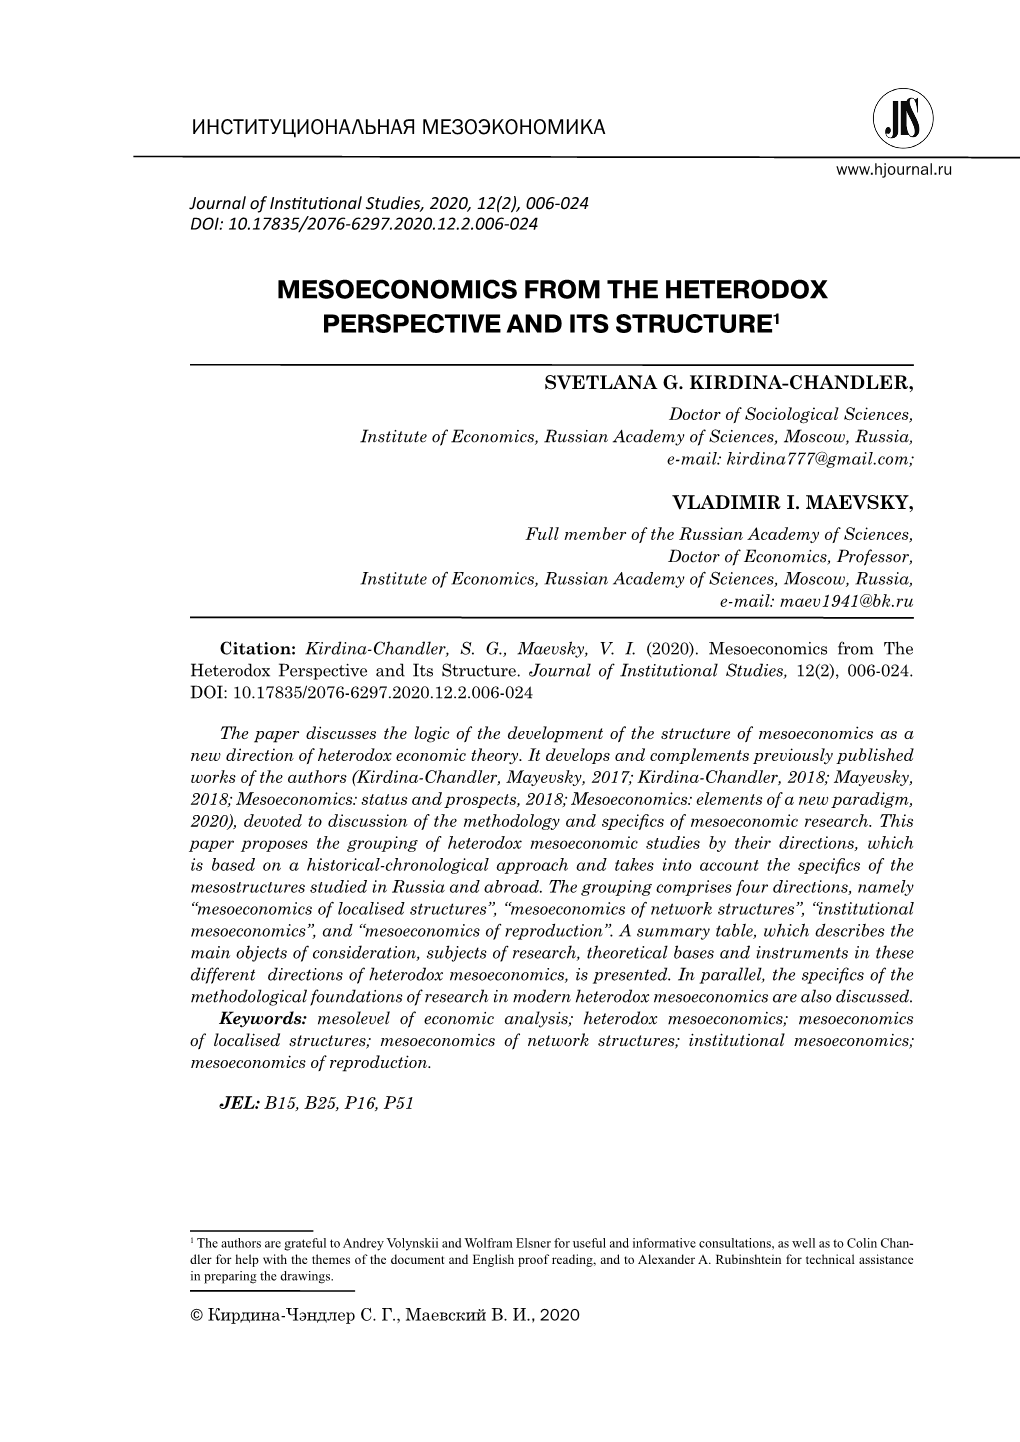 Mesoeconomics from the Heterodox Perspective and Its Structure1